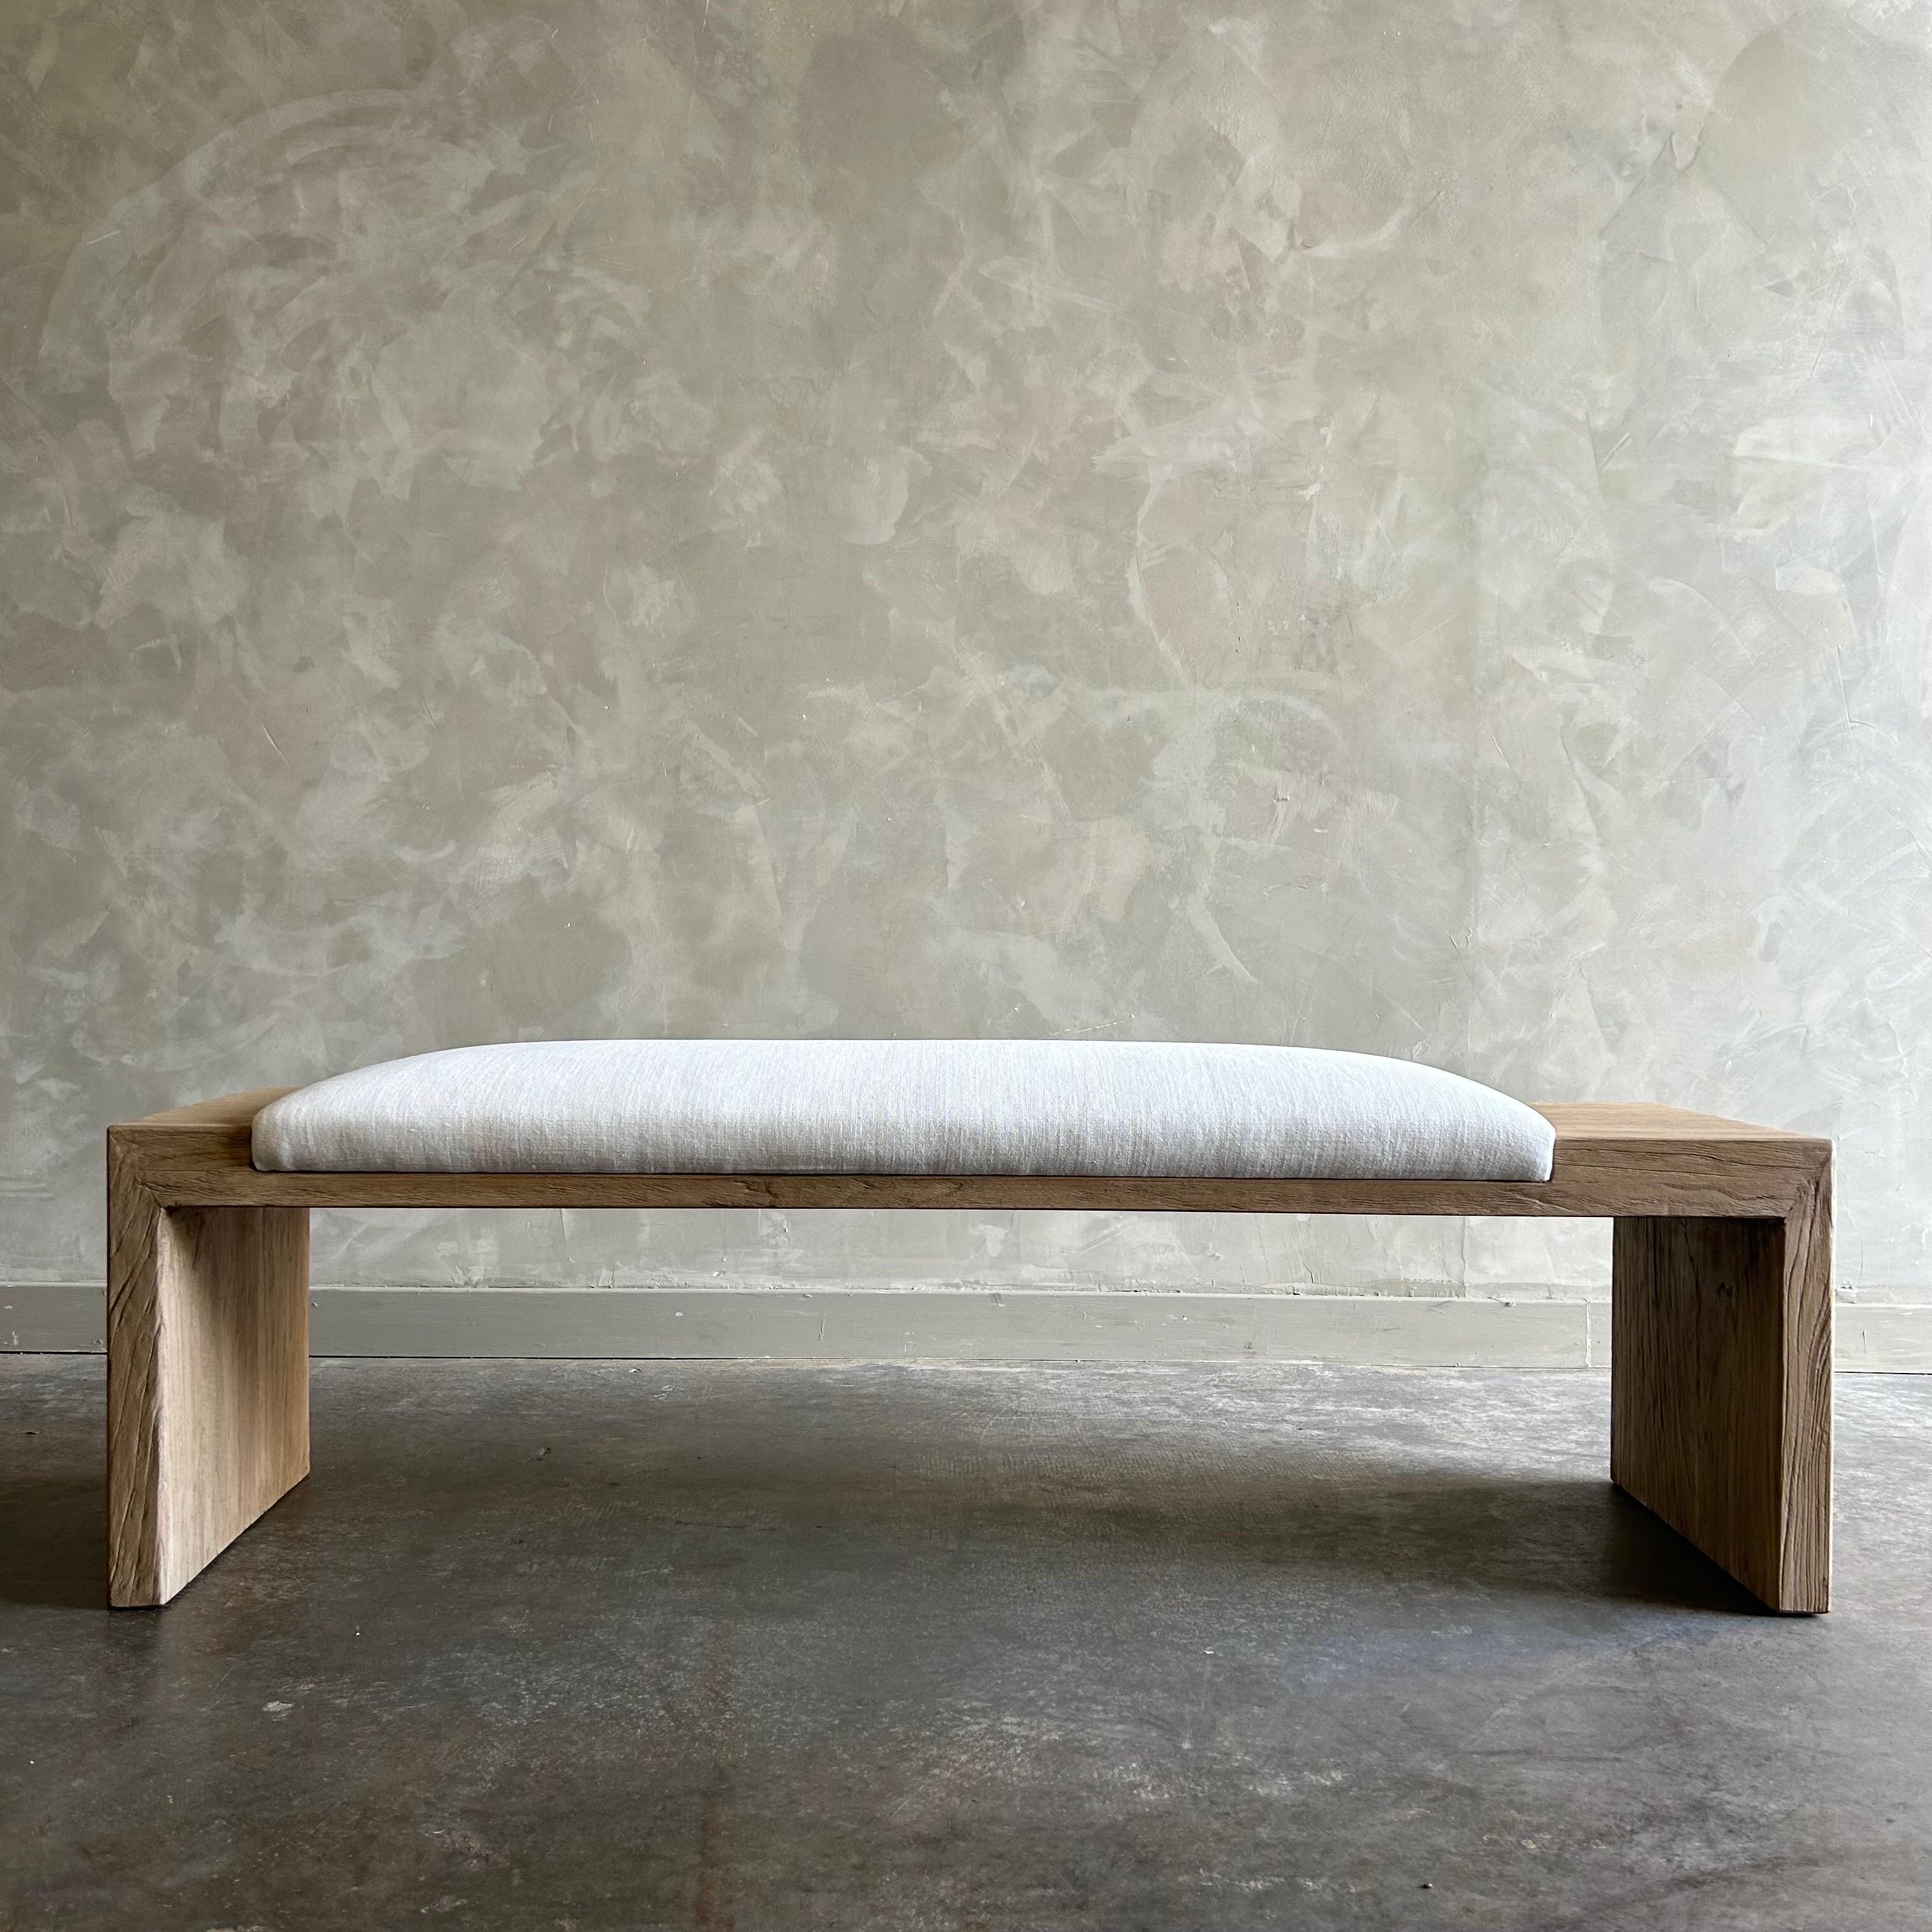 Hand-Crafted Custom Made Elm Wood Bench with Linen Upholstery